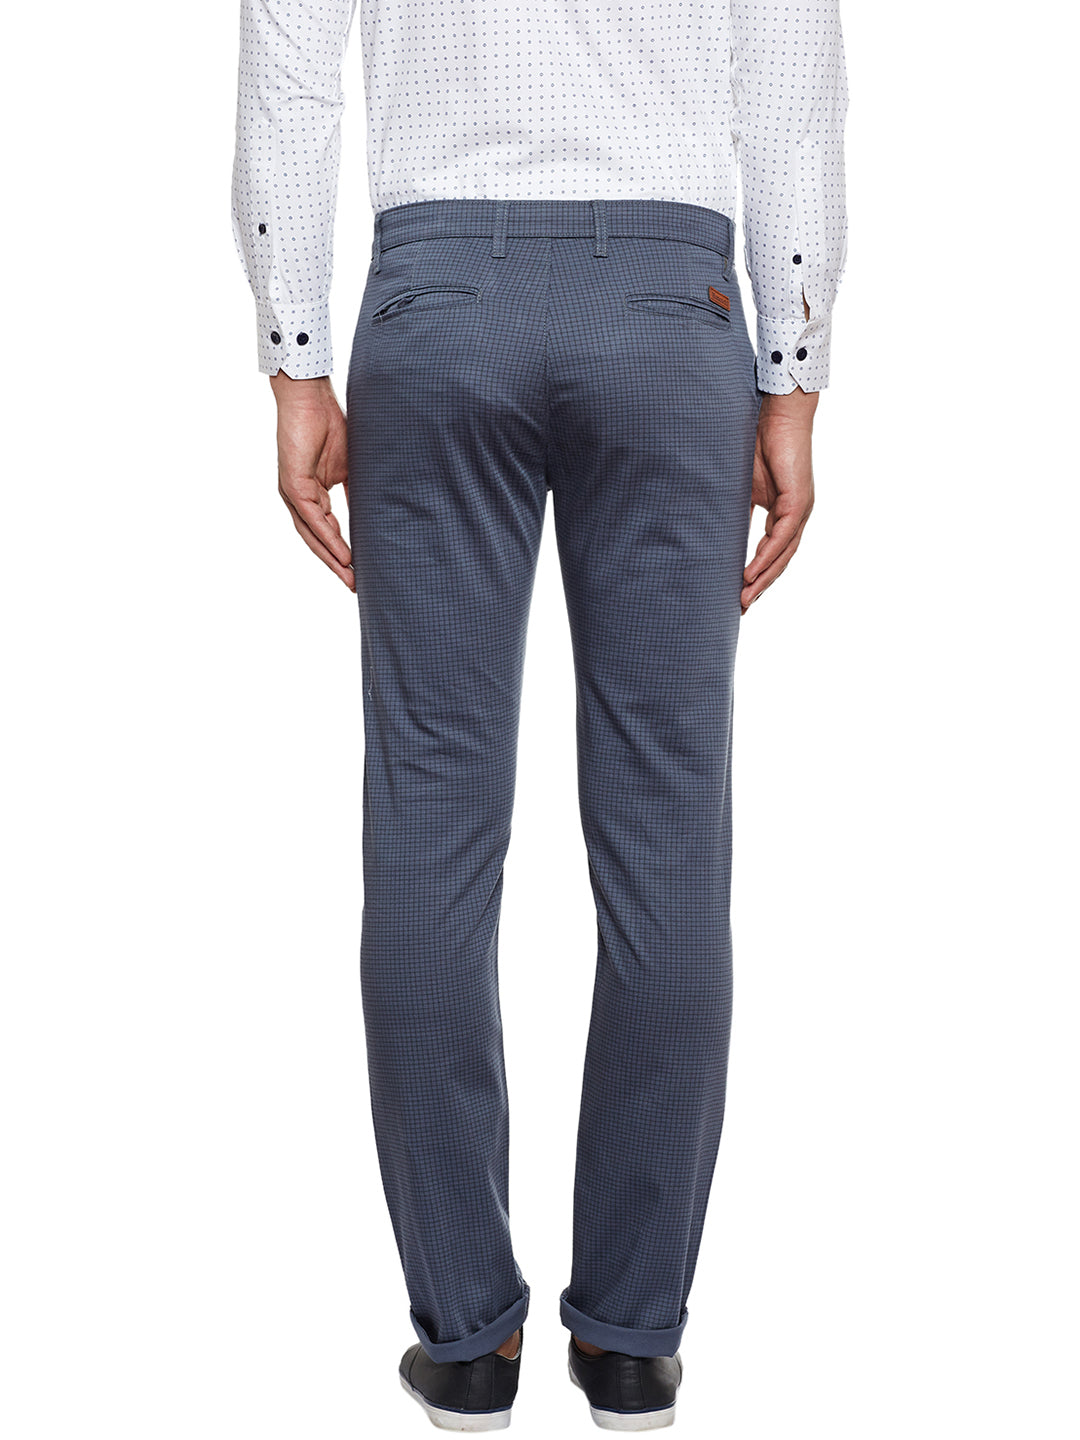 Men Grey Checked Slim Fit Casual Stretchable Chinos Trouser